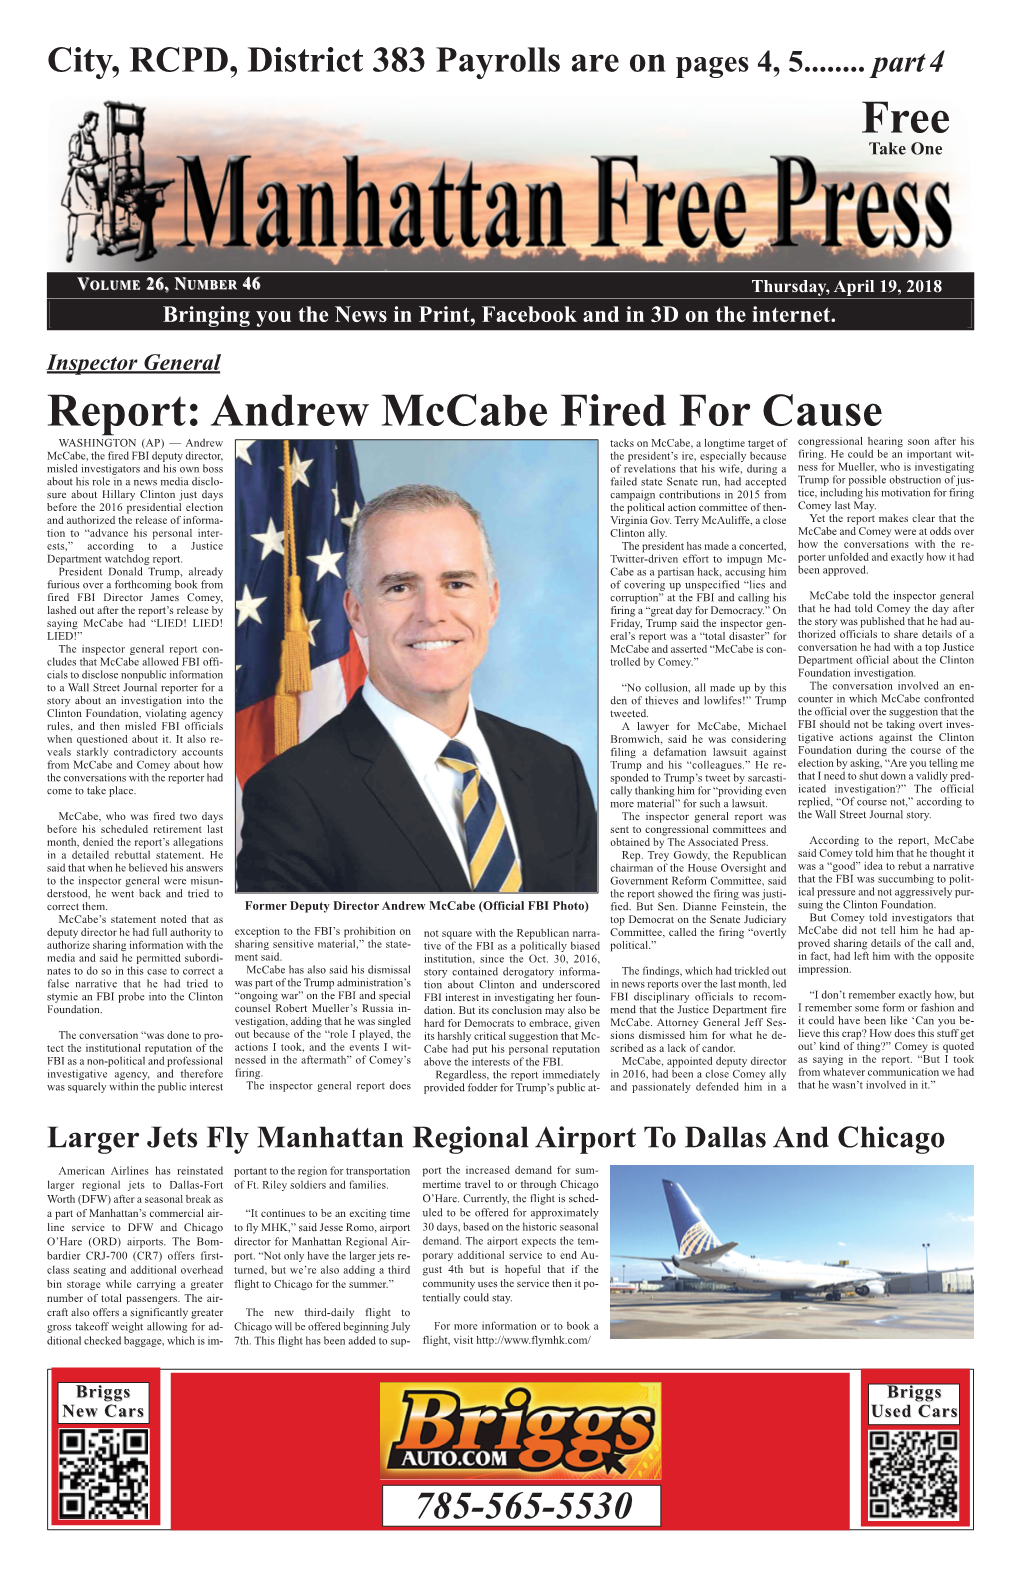 Andrew Mccabe Fired for Cause Free